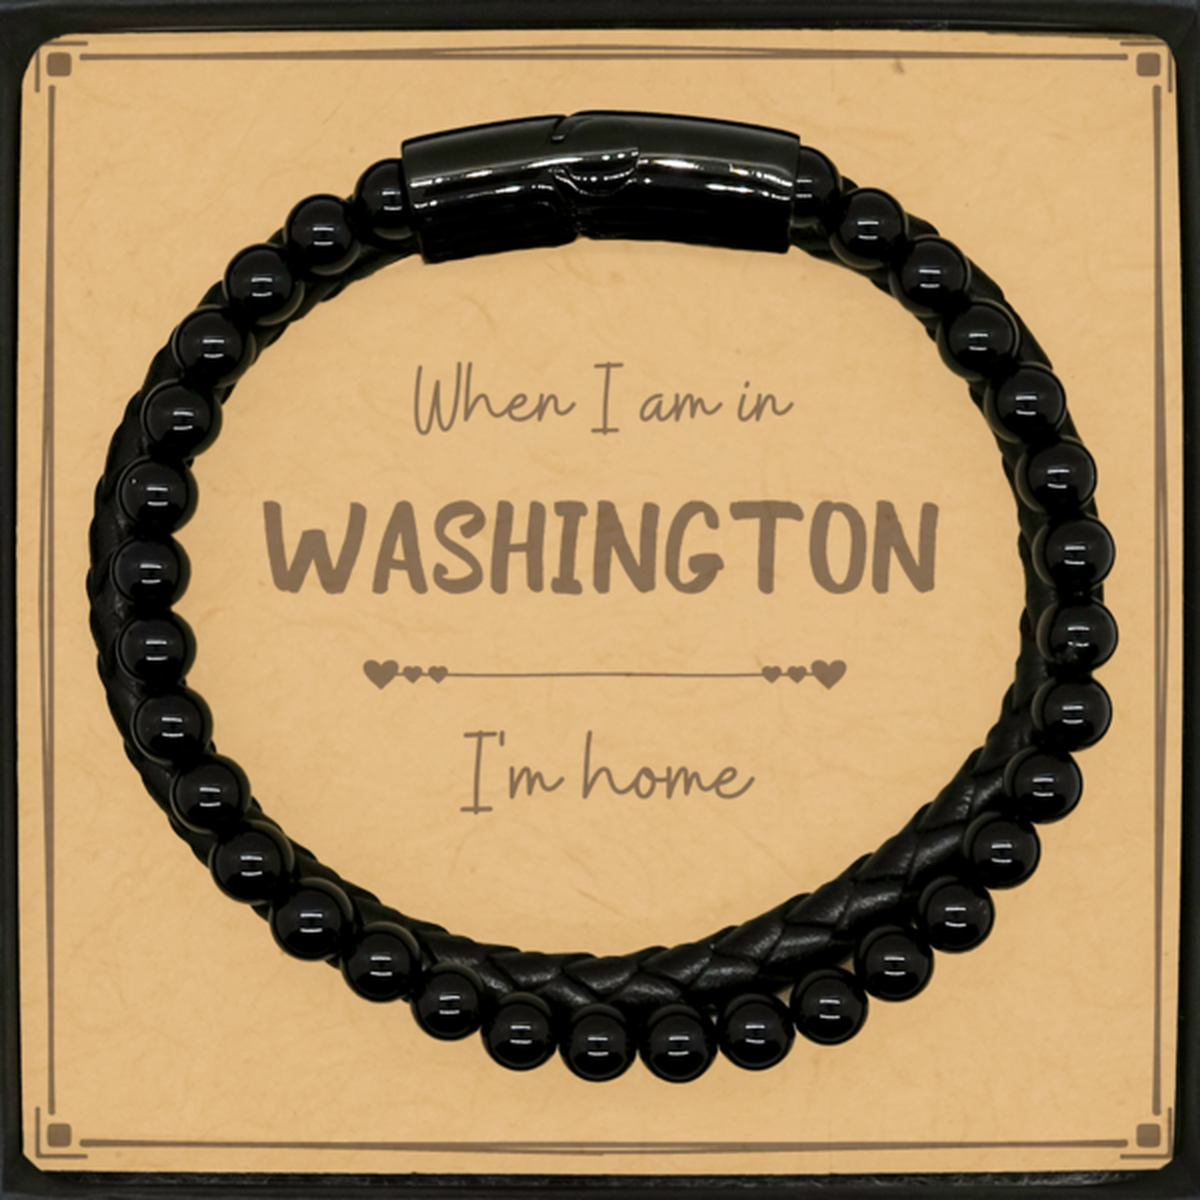 When I am in Washington I'm home Stone Leather Bracelets, Message Card Gifts For Washington, State Washington Birthday Gifts for Friends Coworker